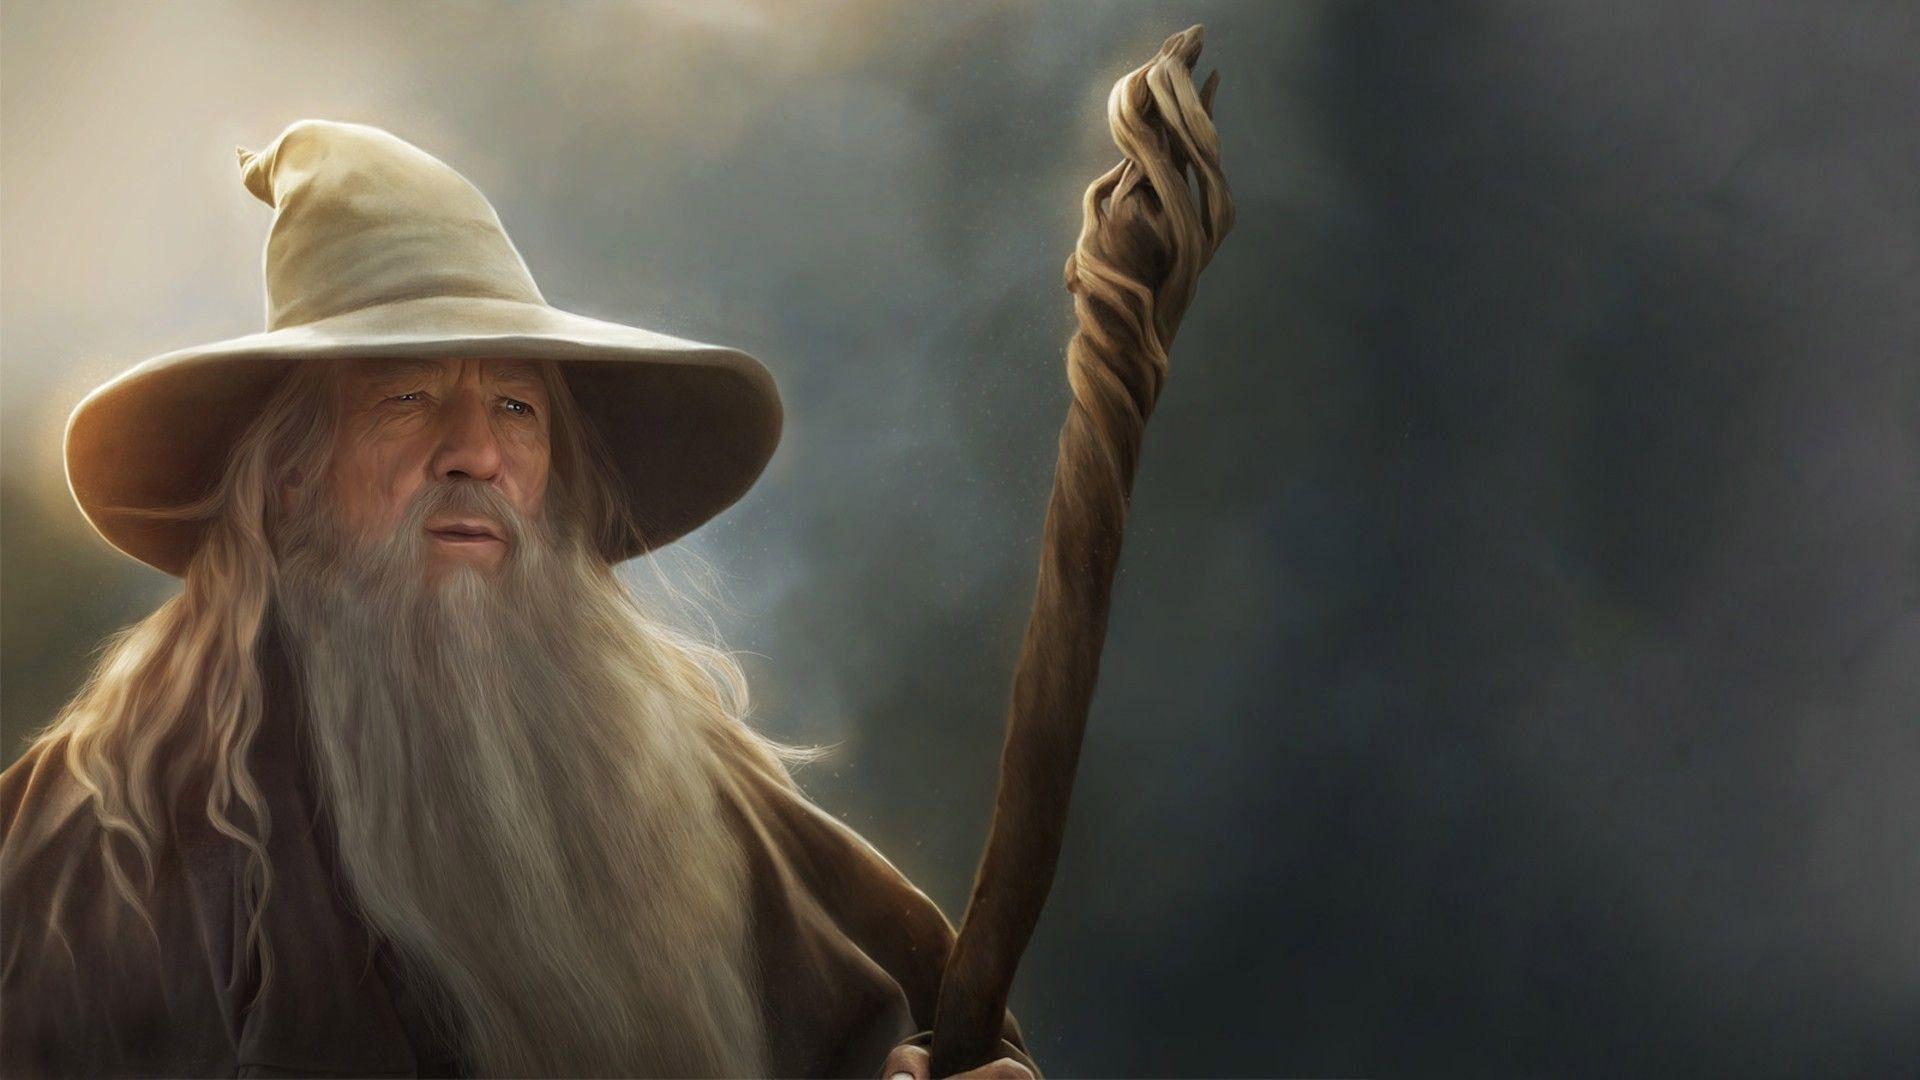 Gandalf Wallpaper for PC. Full HD Picture